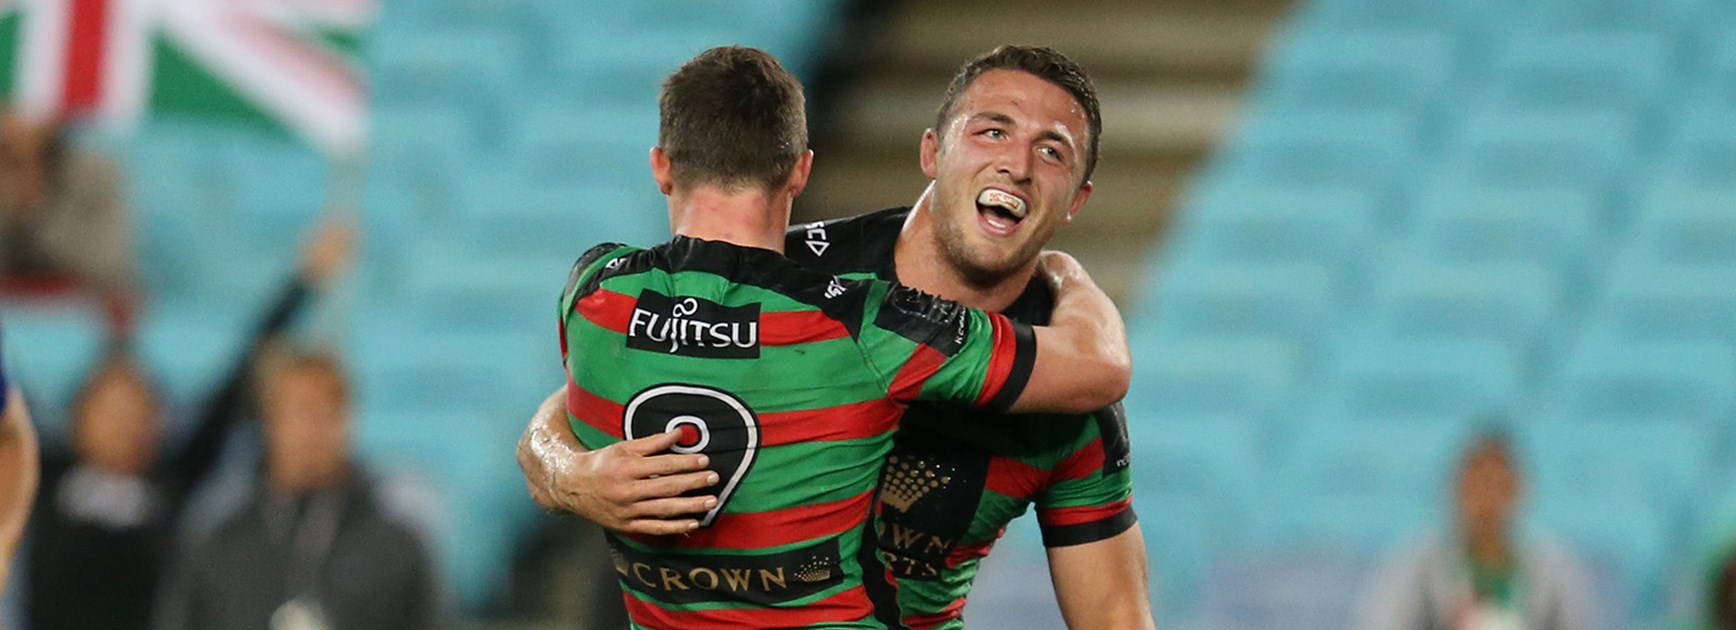 Sam Burgess celebrates his try against the Bulldogs.